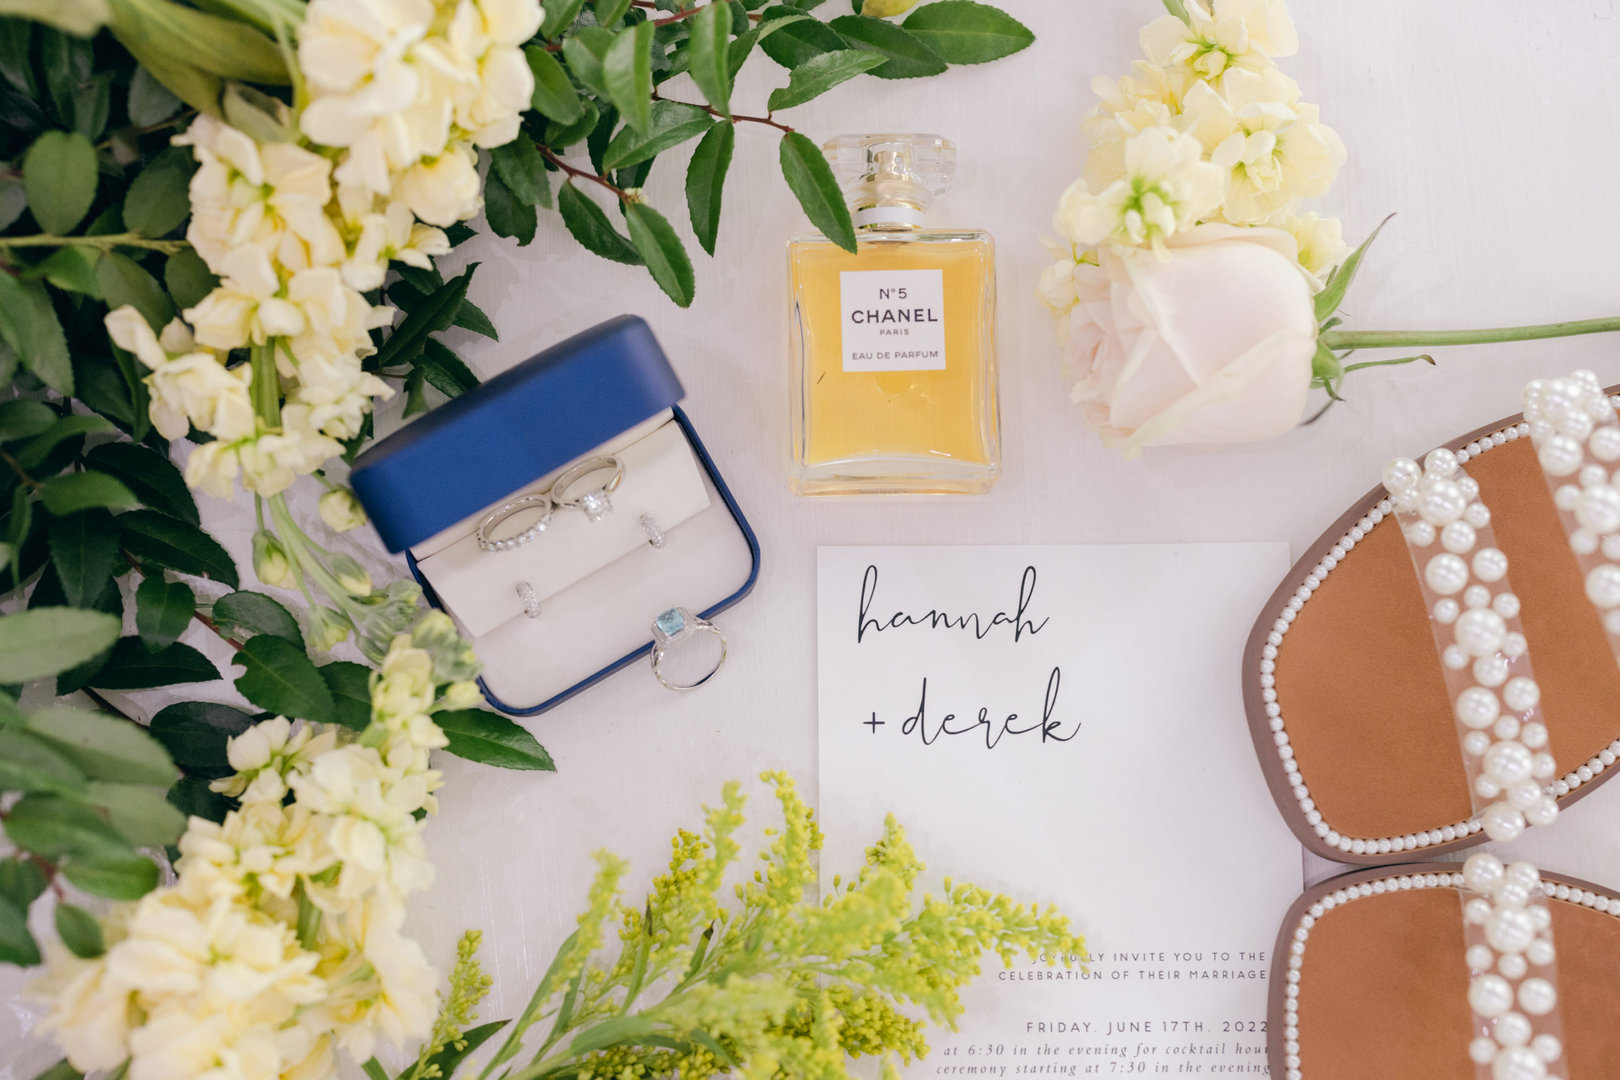 luxury wedding details for Kindred North wedding, including Blakeman's Fine Jewelry ring and earrings, chanel no 5 perfume, and greenery.